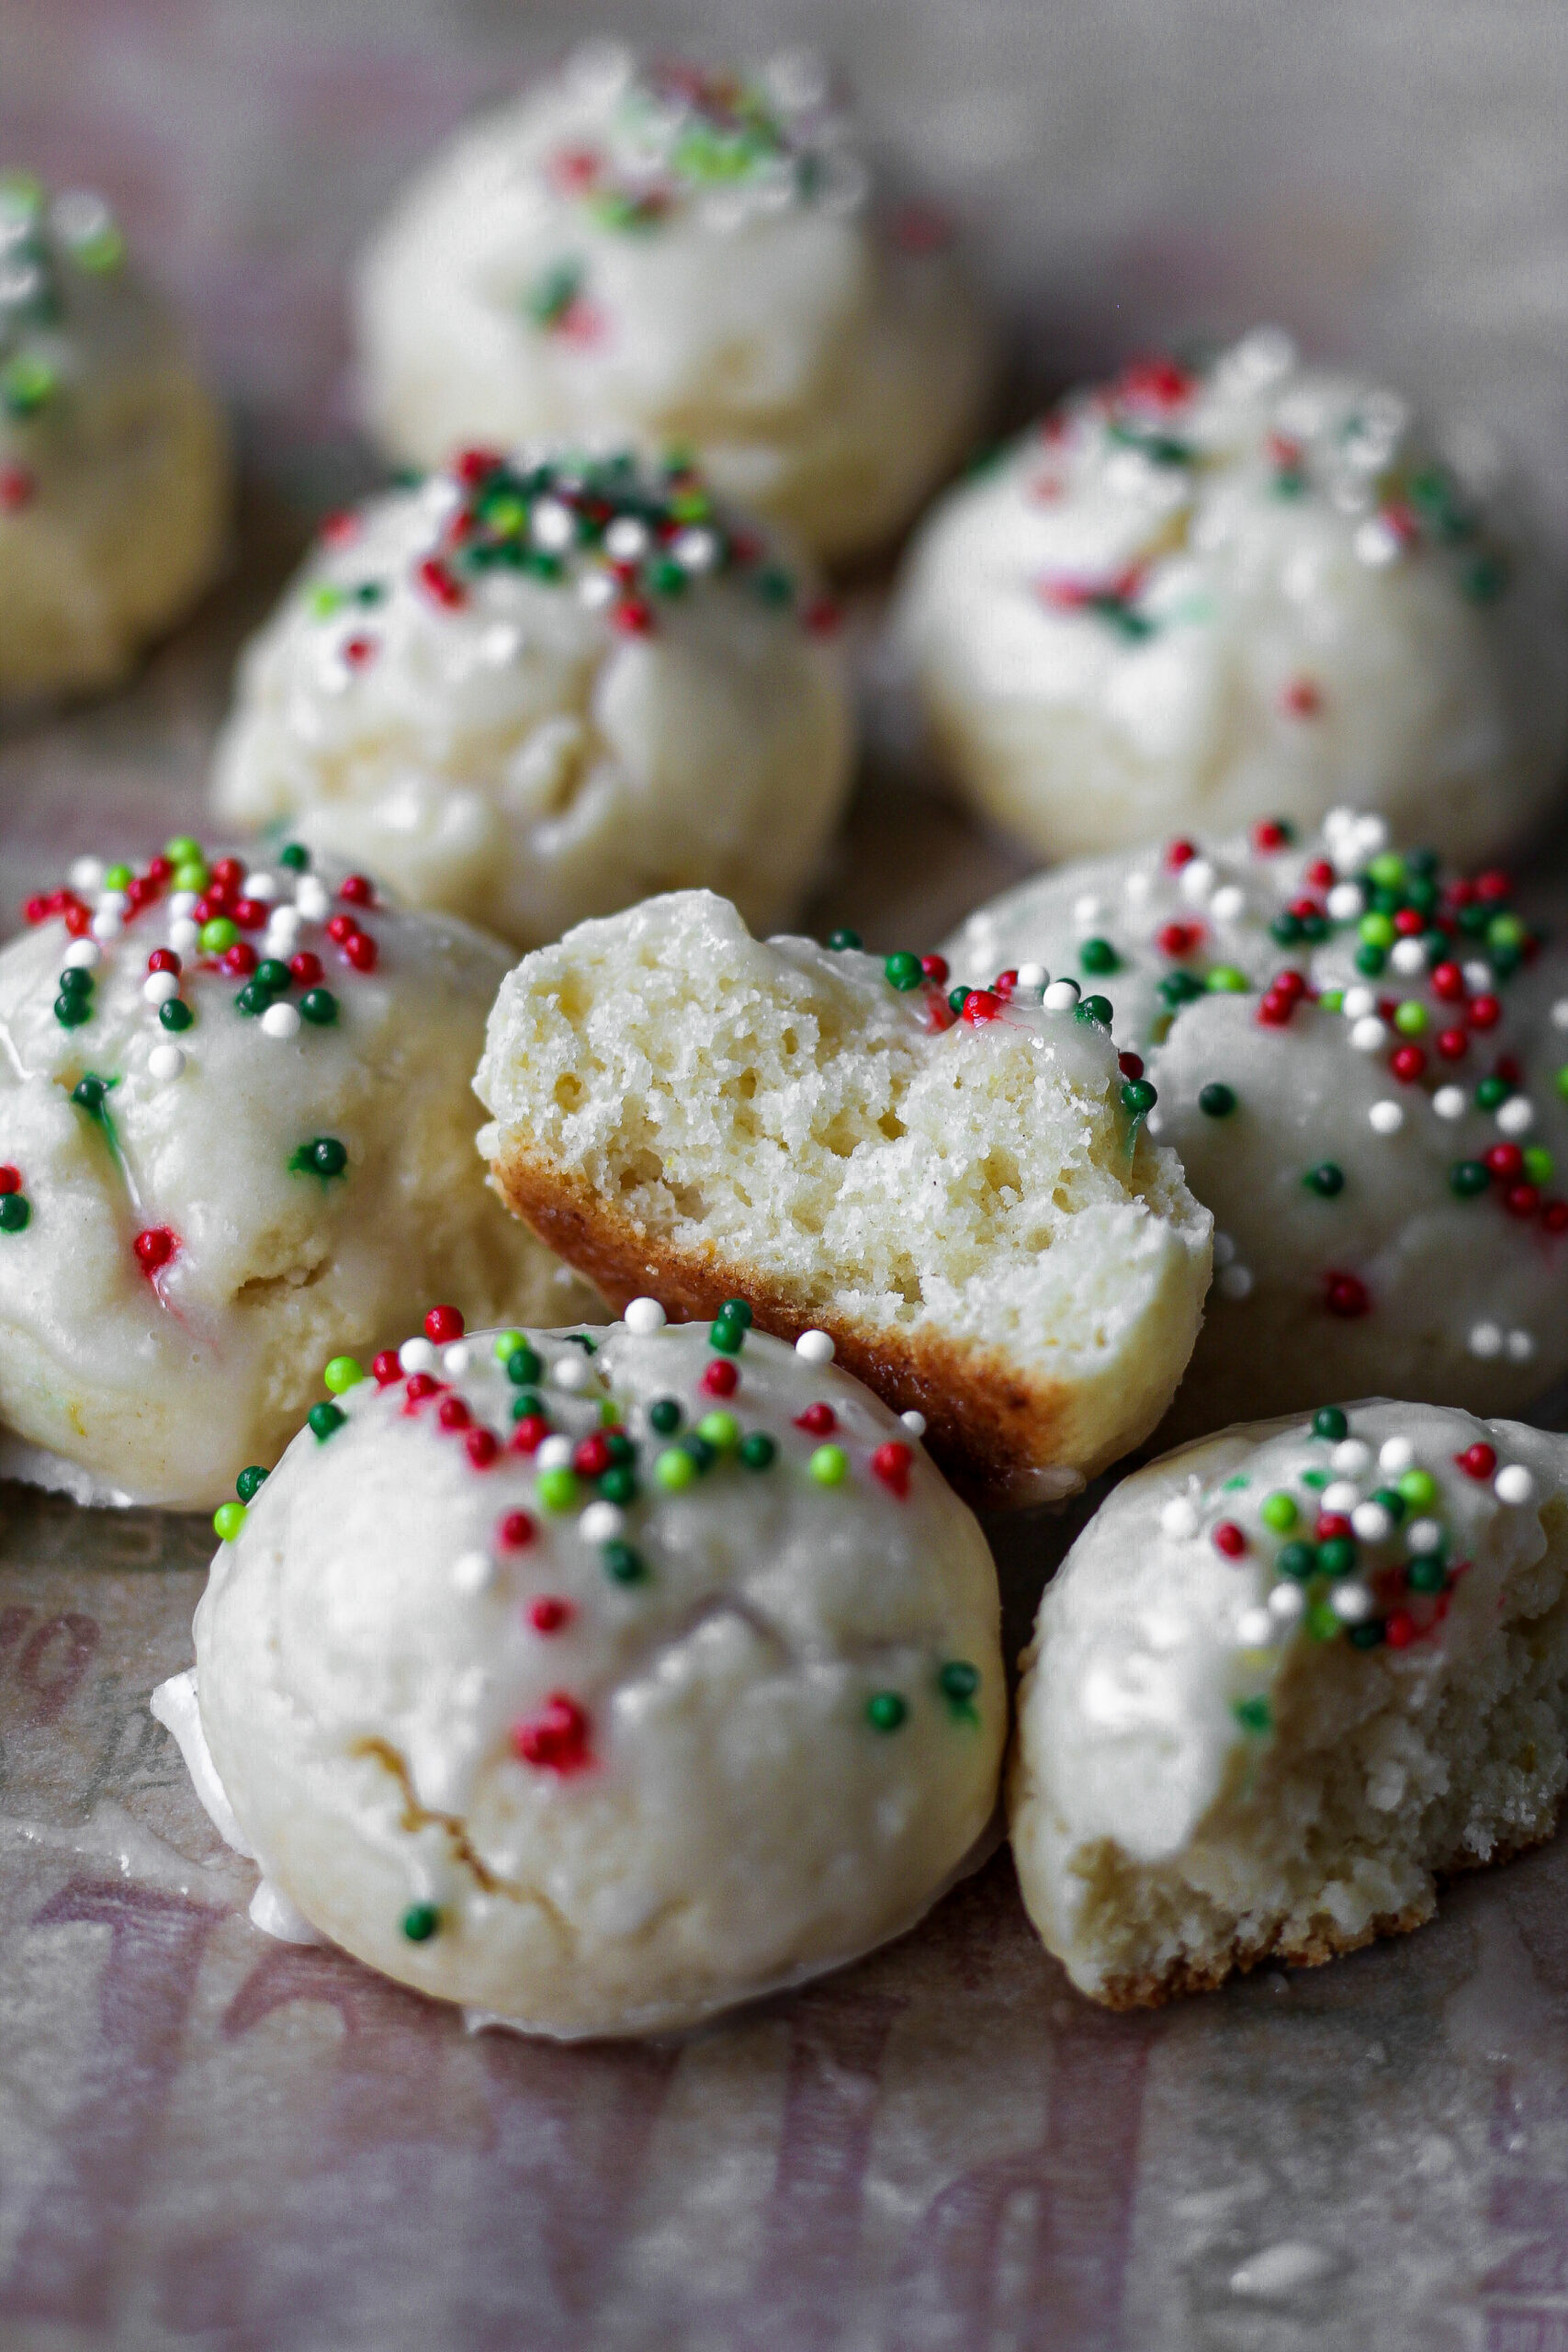 Italian Ricotta cookies are great for Christmas